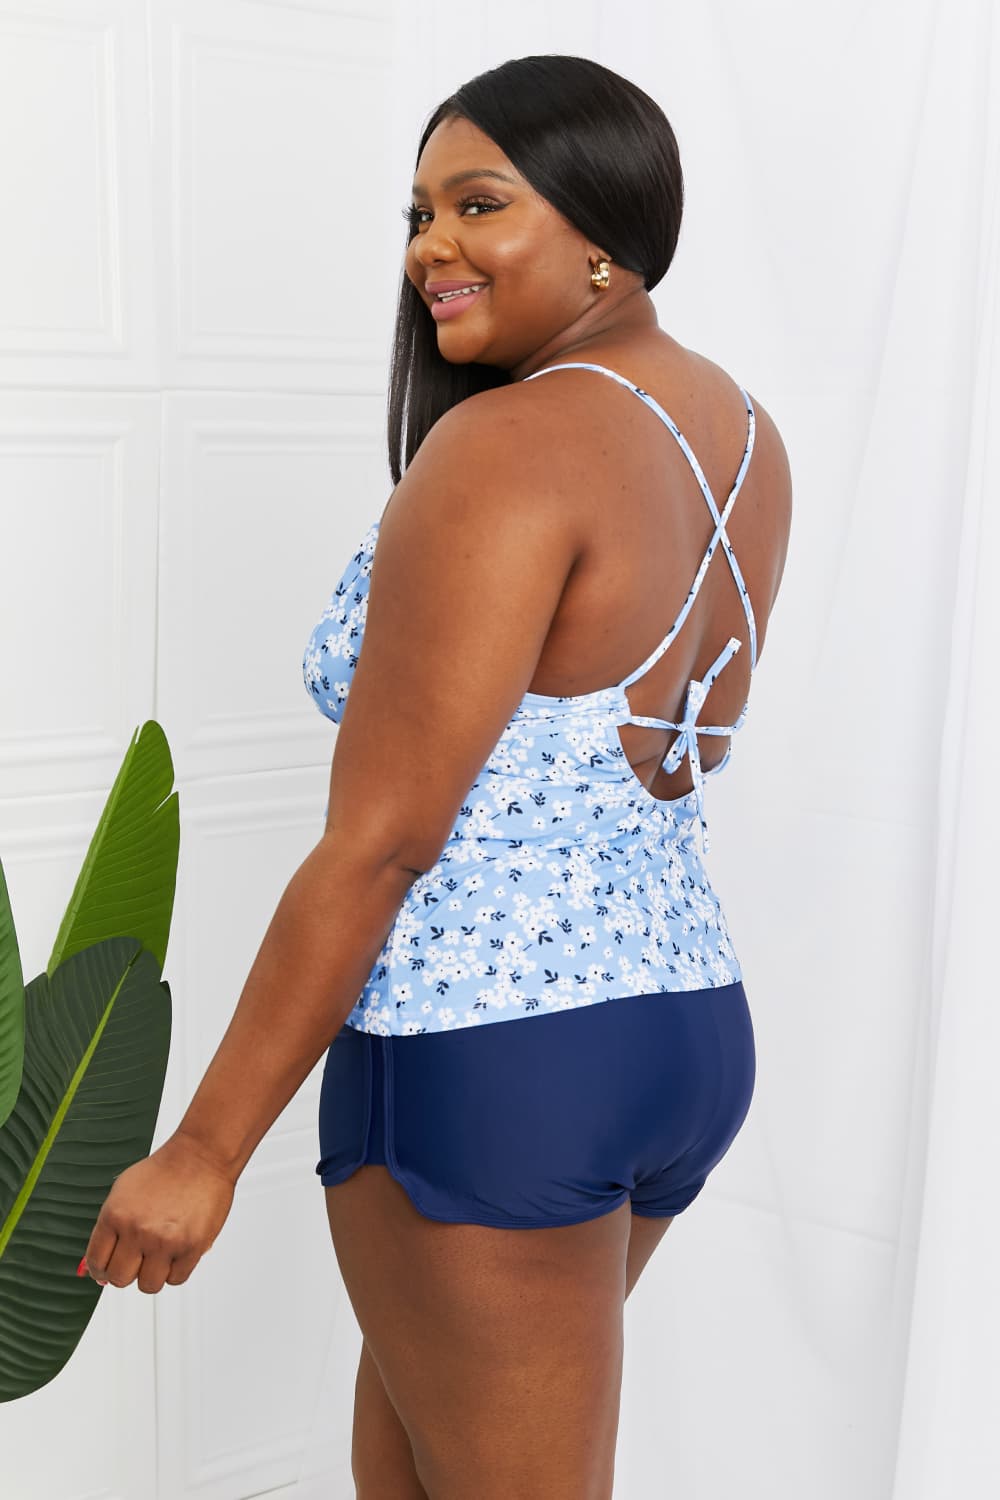 Marina West Swim By The Shore Plus Size Two-Piece Swimsuit in Blossom Navy Sunset and Swim   